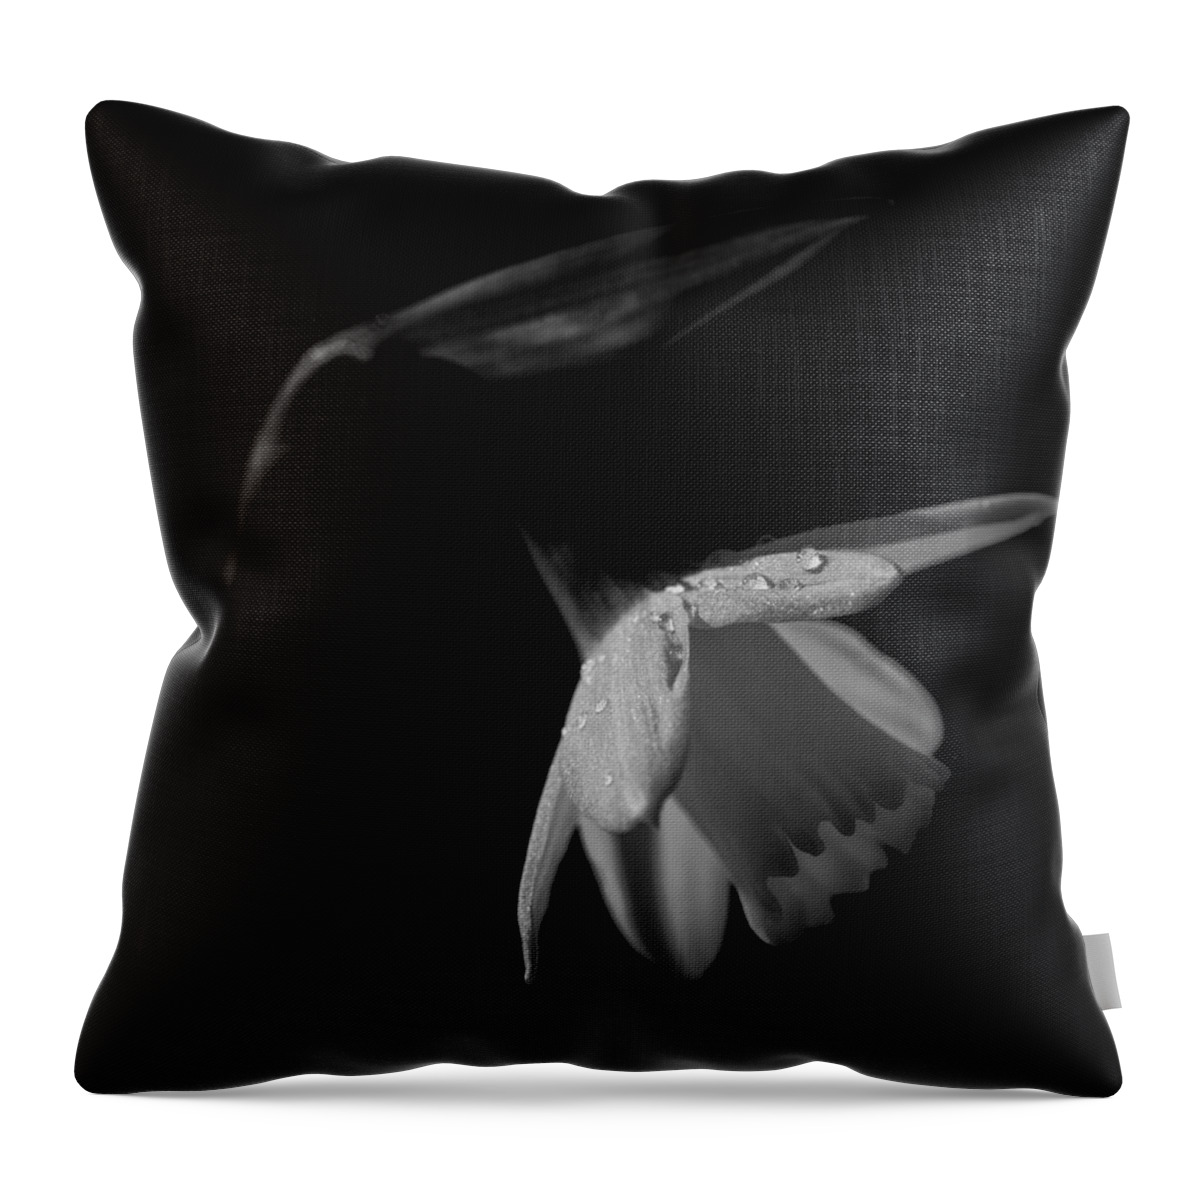 Daffodil Throw Pillow featuring the photograph Daffodil by Nigel R Bell